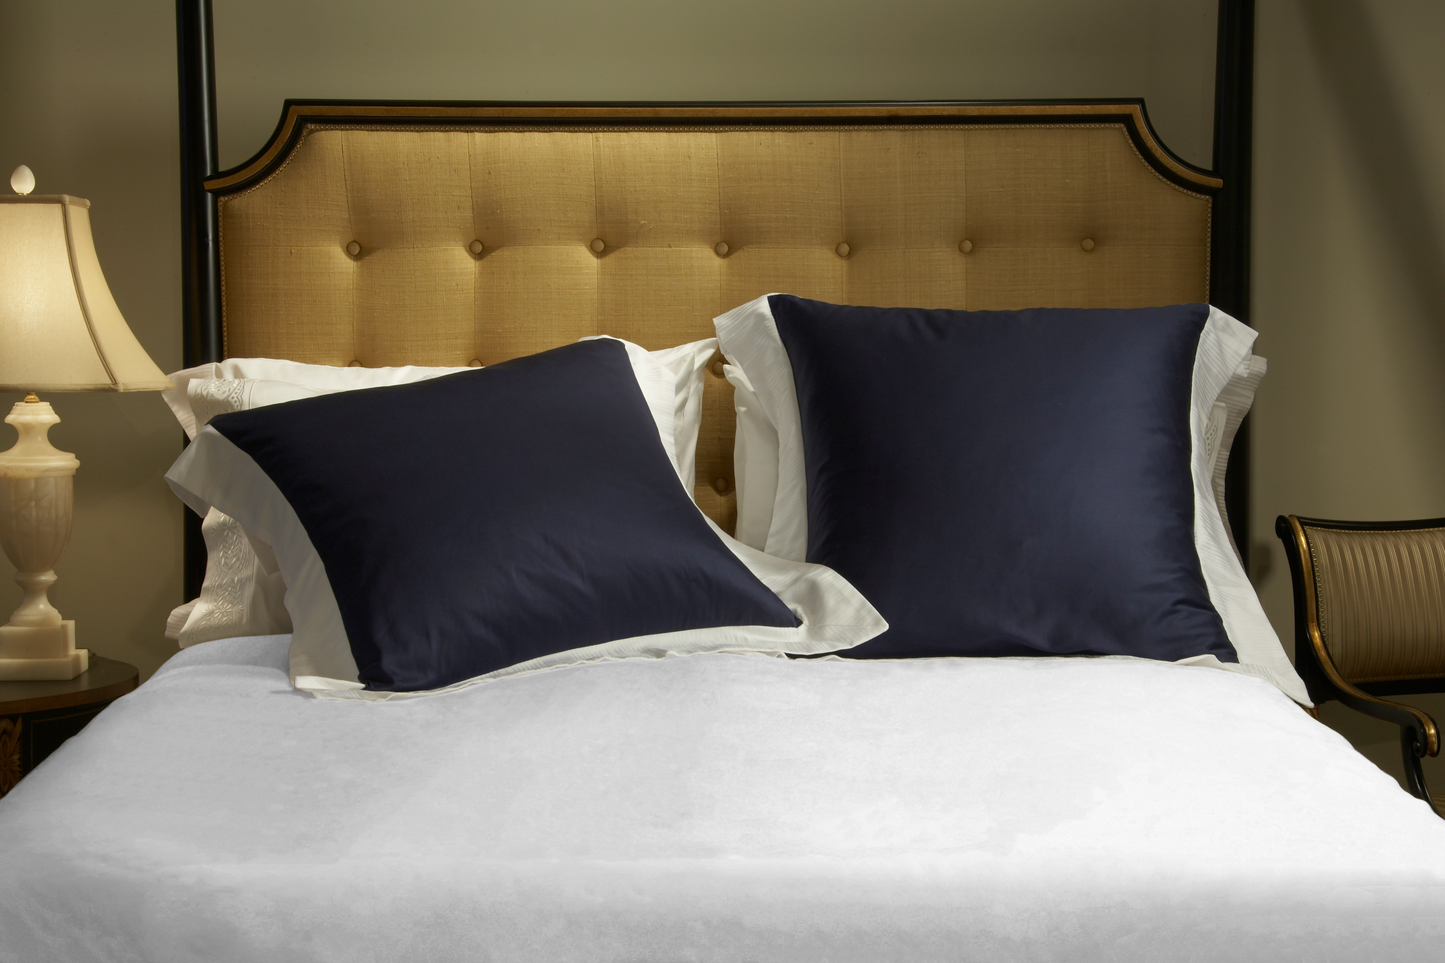 Photo of  a bed by WAB Studios with Two Navy Soleil Sateen Euro Shams with White Soleil Jacquard Borders on 4 sides with a White Soleil Sateen Duvet Cover.  Two queen pillows behind are Kearsley White Essentials Sateen with White Tyrolean II Embroidery on the cuffs.  Woven and made in Italy to the highest ethical, environmental, and craftsmanship standards.  Luxury Linens